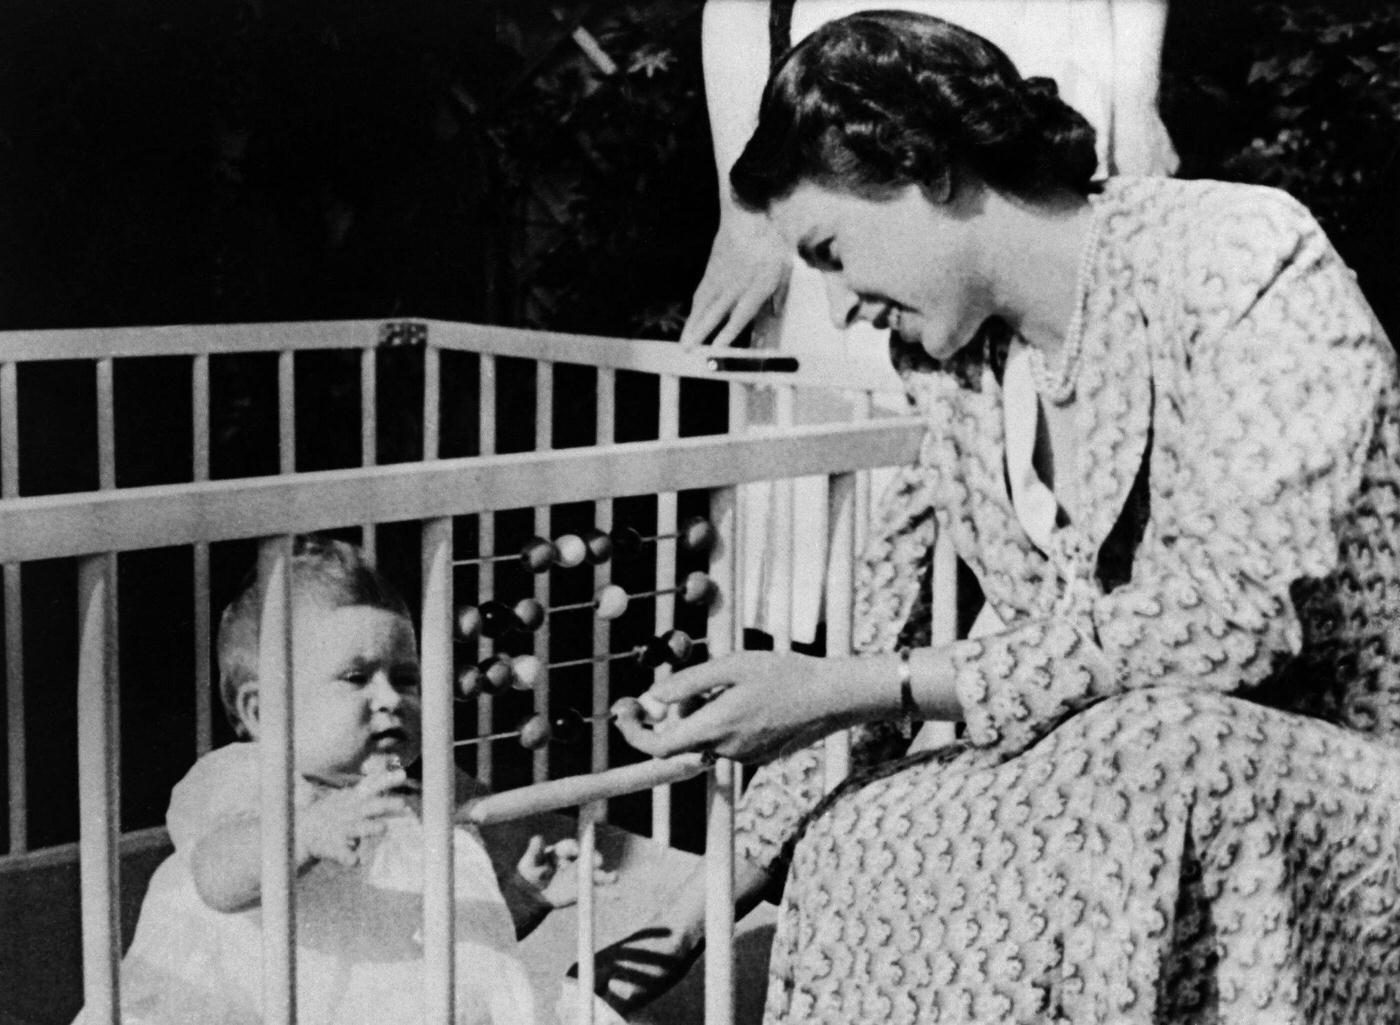 Future Queen Elizabeth II of England with her baby Prince Charles, 1949.